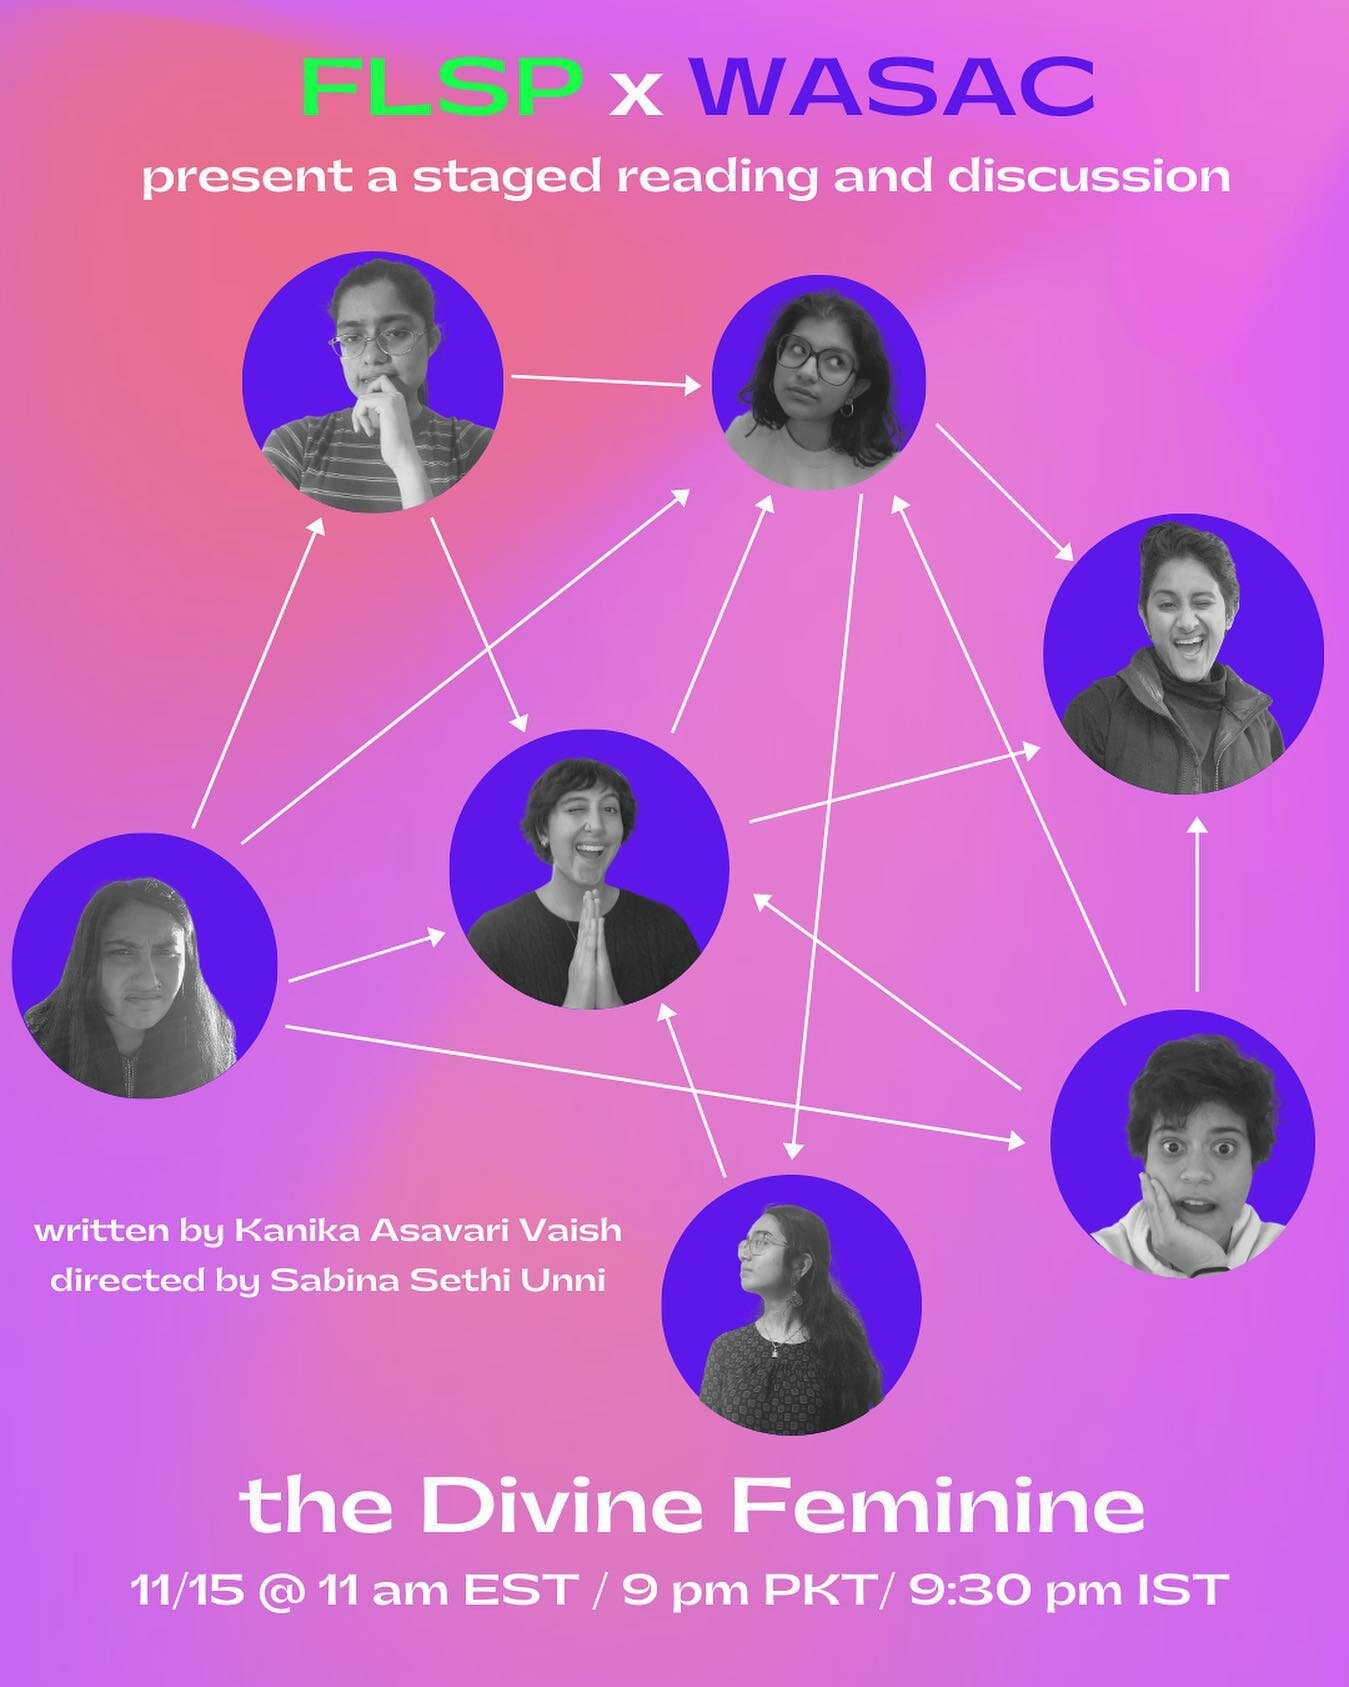 We are excited to announce a new staged reading and discussion, in collaboration @wellesley_wasac: The Divine Feminine, written by Kanika Asavari Vaish, directed by Sabina Sethi Unni, and featuring @wellesleycollege students and alums!

Synopsis: Dev